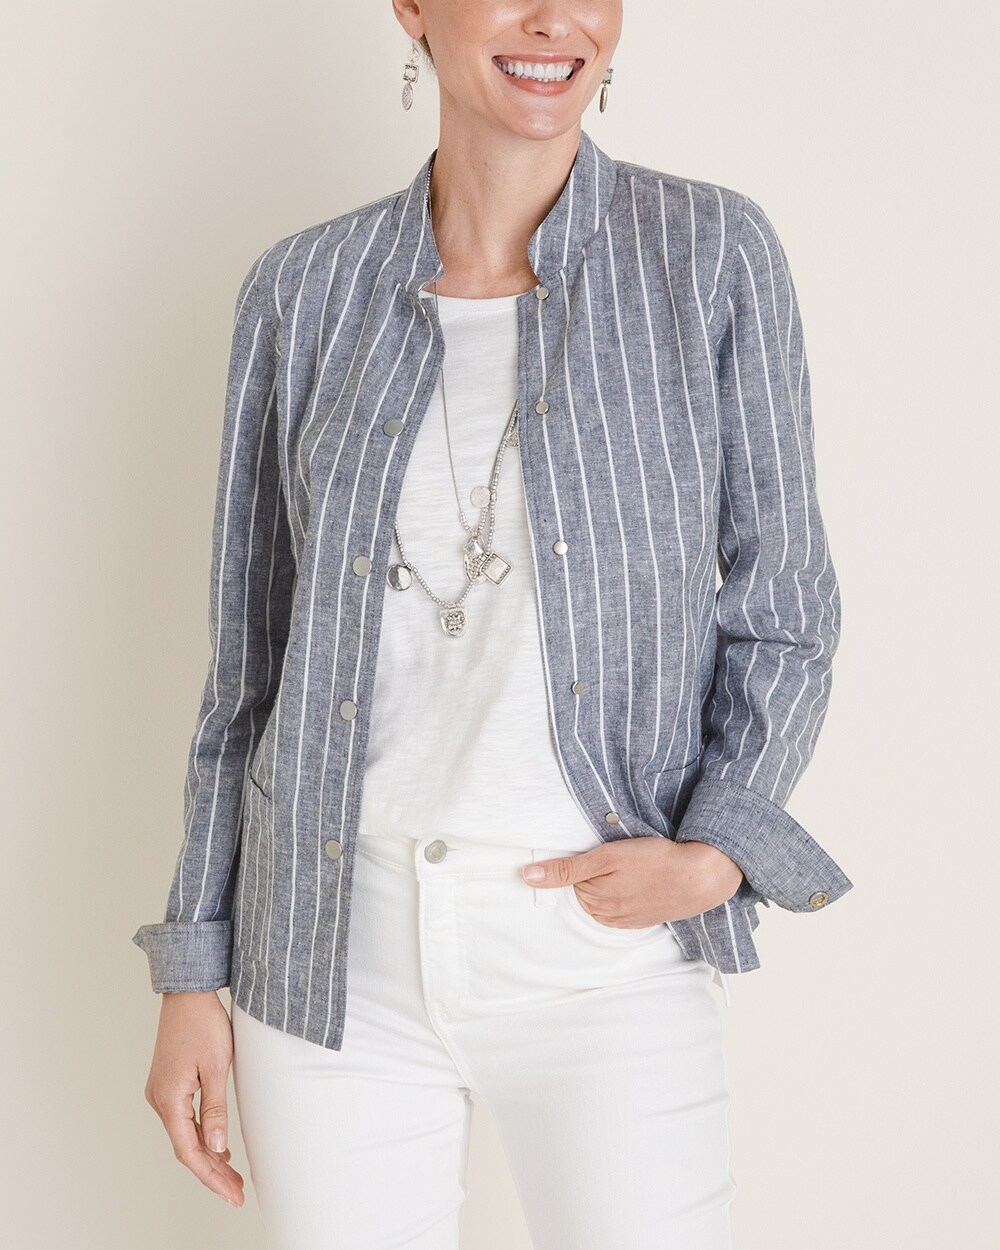 Reversible Striped to Solid Linen Jacket - Chico's